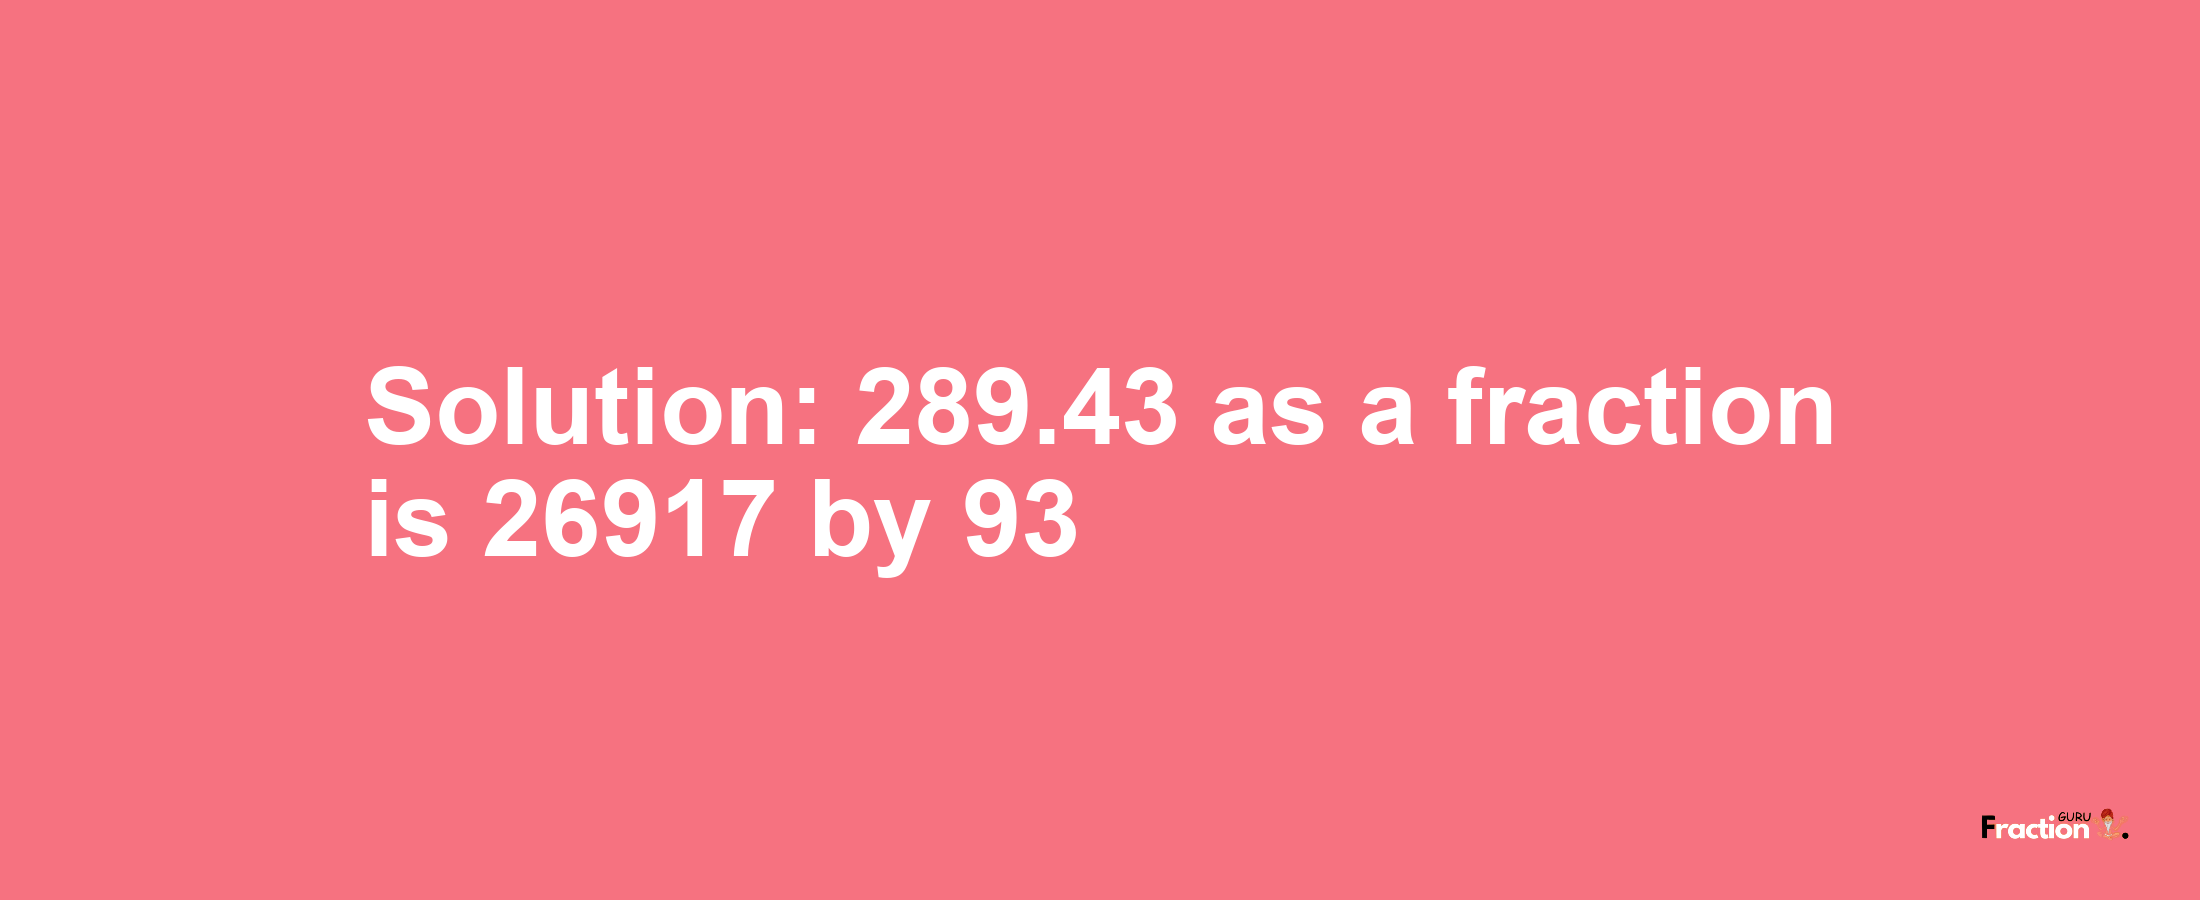 Solution:289.43 as a fraction is 26917/93